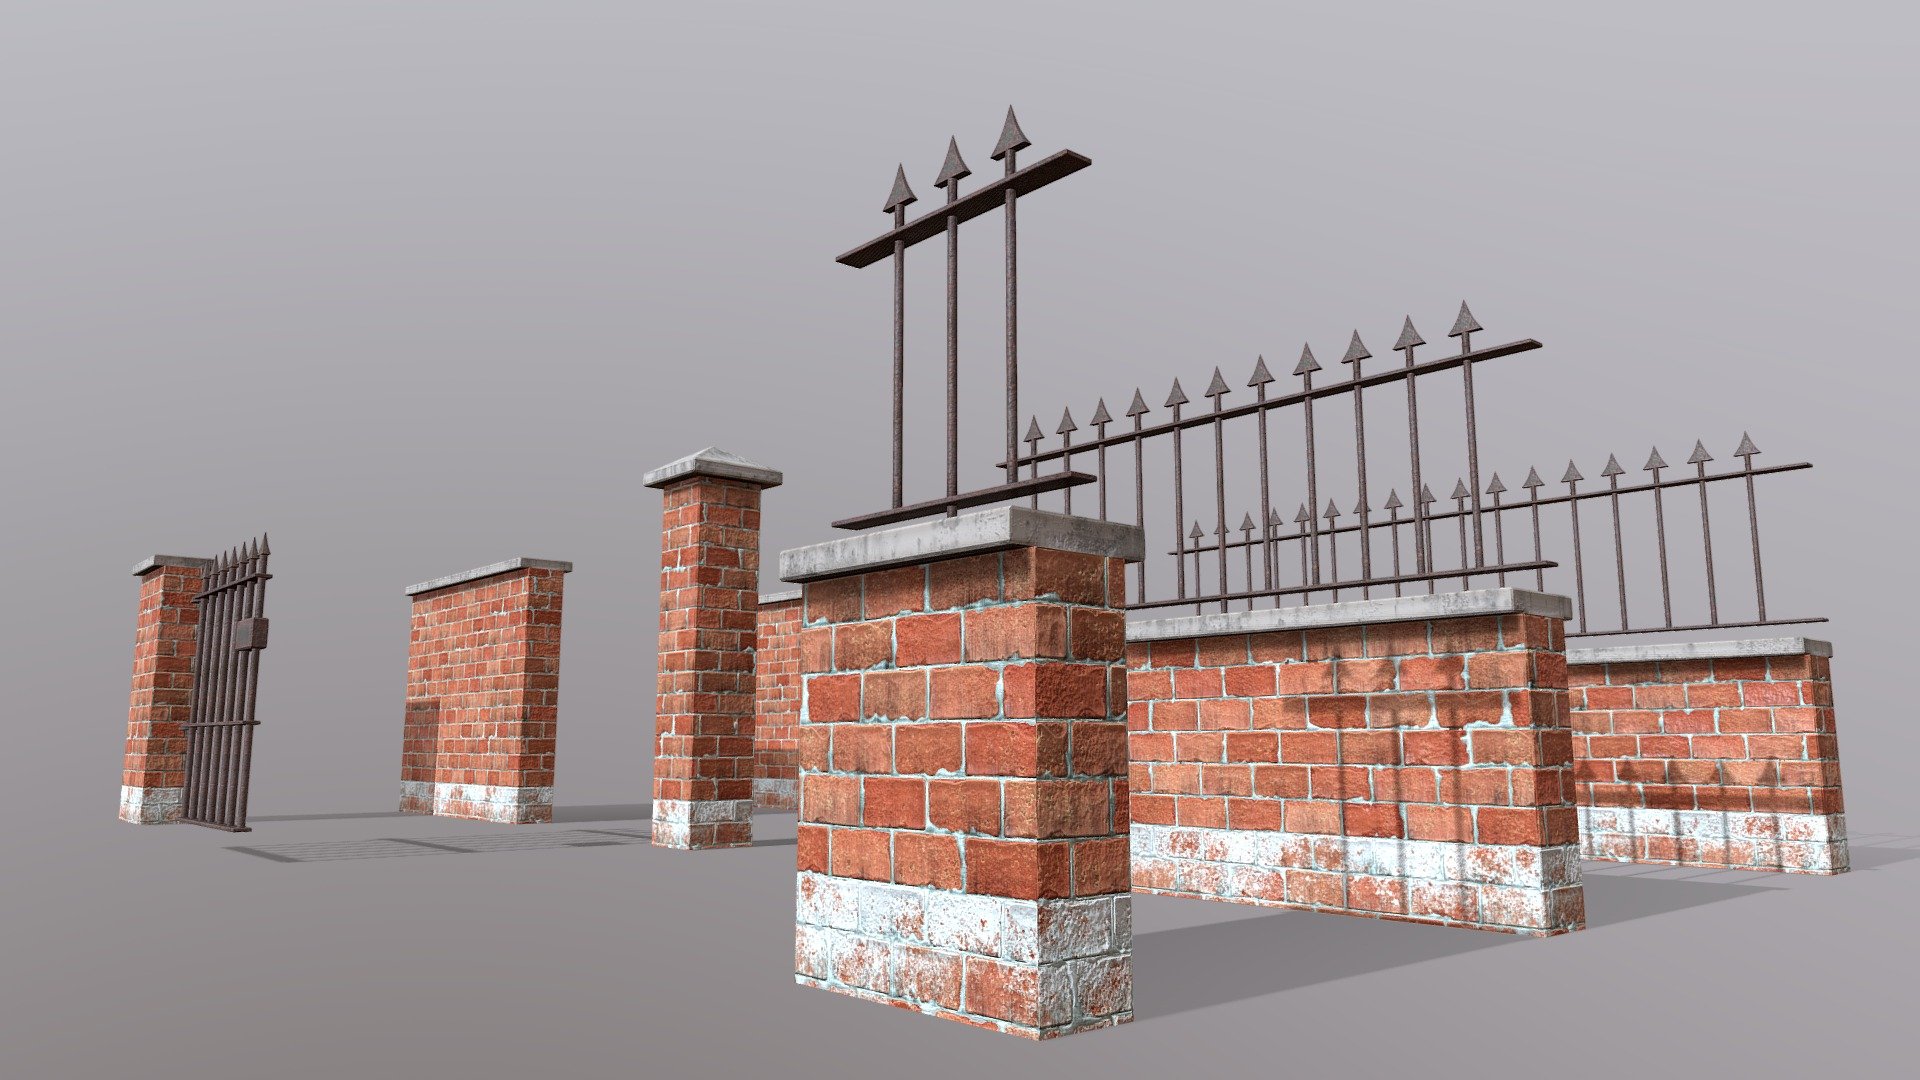 Fully Modular Brick Wall Pack for games and animations. The model is game ready and compatible with game engines. 

It can be used to create a garden wall, fence or a boundary wall for realistic games.

TWO variations of the wall are included.

The package contains 4K (4096x4096) PBR textures which are highly detailed HD.

Specific PBR maps for the following  game engines are included in separate files:


Unity
Unreal
PBR - Metal Rough

The package contains 8 Individual modular pieces that can be arranged in any desired formation.

Pieces included:


3 sizes of wall with wrought iron fence.
3 sizes of taller wall
1 pillar.
1 small metal gate.

Total polycount - 2,215 polygons - 2,568 Vertices (Low-Poly)

The 3d model is properly UV mapped with non-overlapping and optimised UV's for a better texel density.  

Create and build your own PC &amp; mobile environments using our PBR Modular Fence Pack 3d model